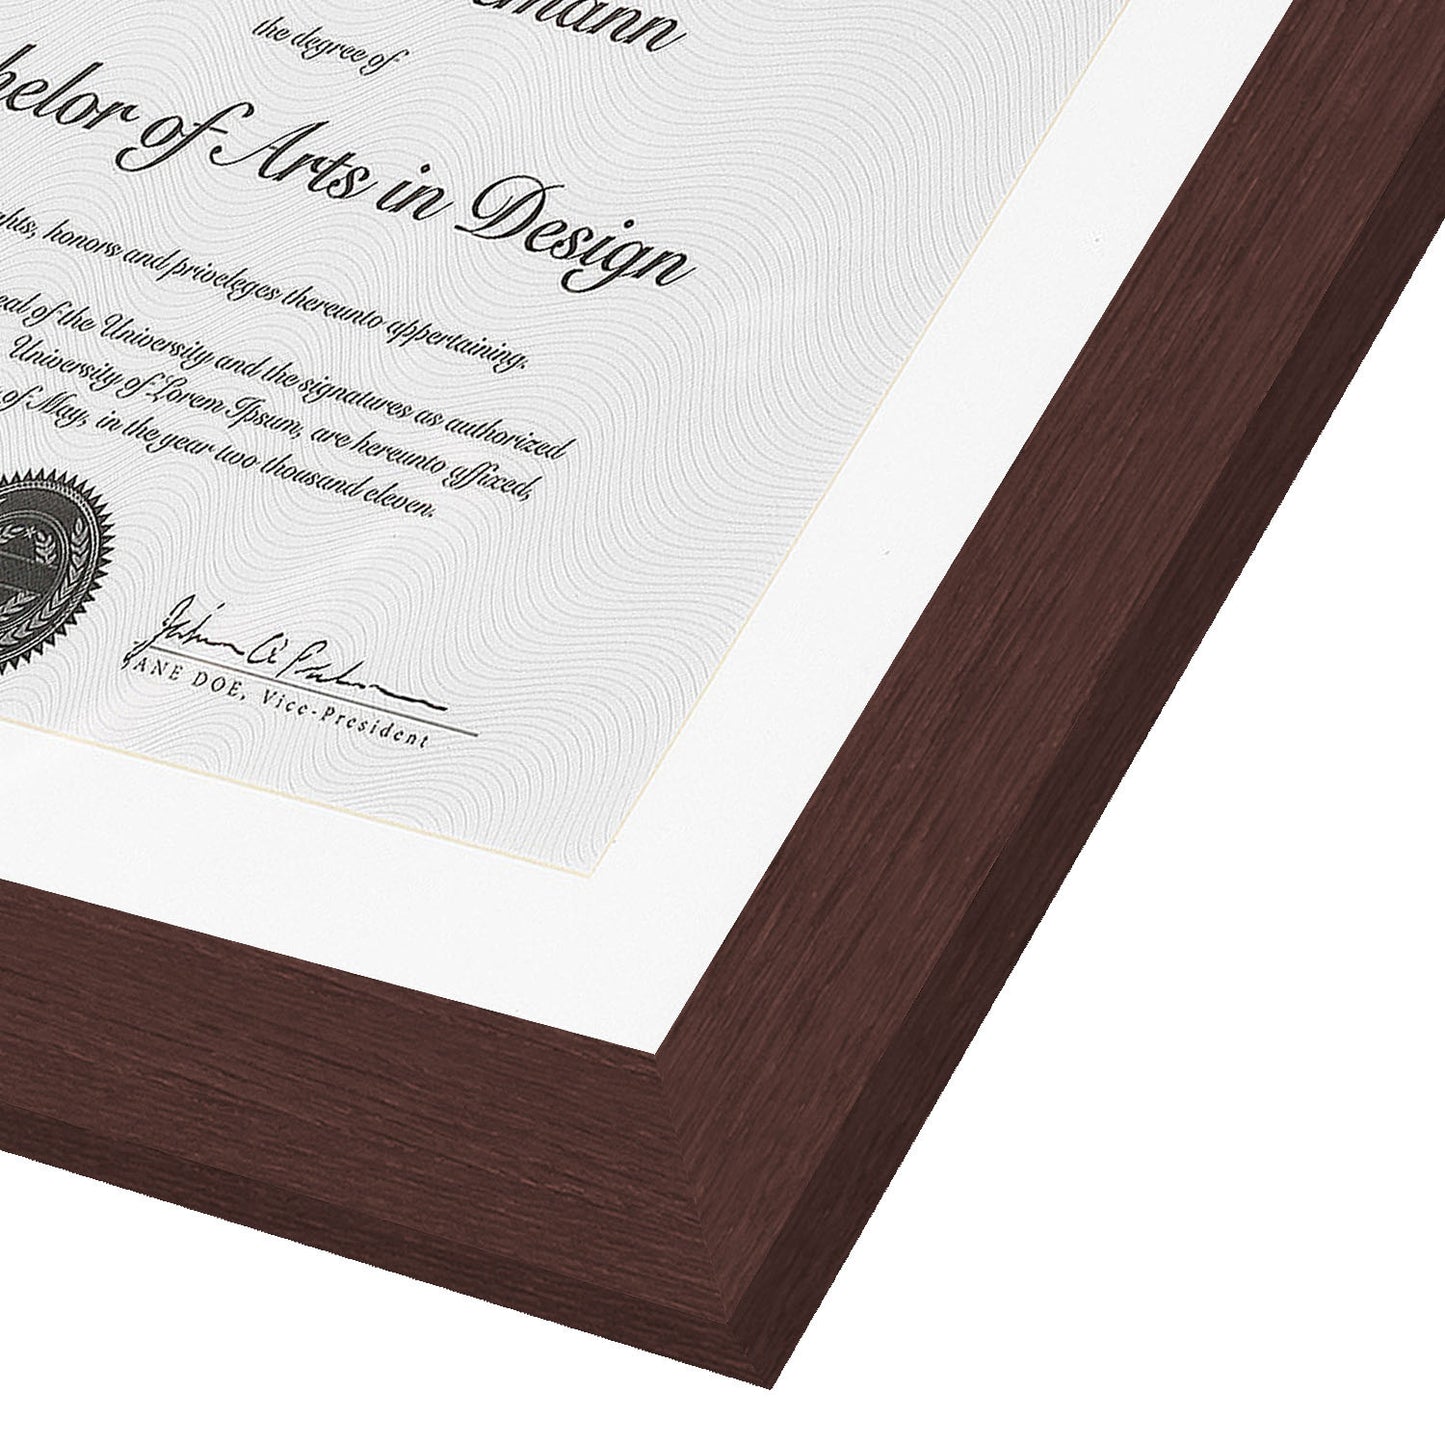 Document Frame Mahogany with Polished Shatterproof Glass for Wall - Acid Free - 11" x 14" - Picture Frame - Americanflat